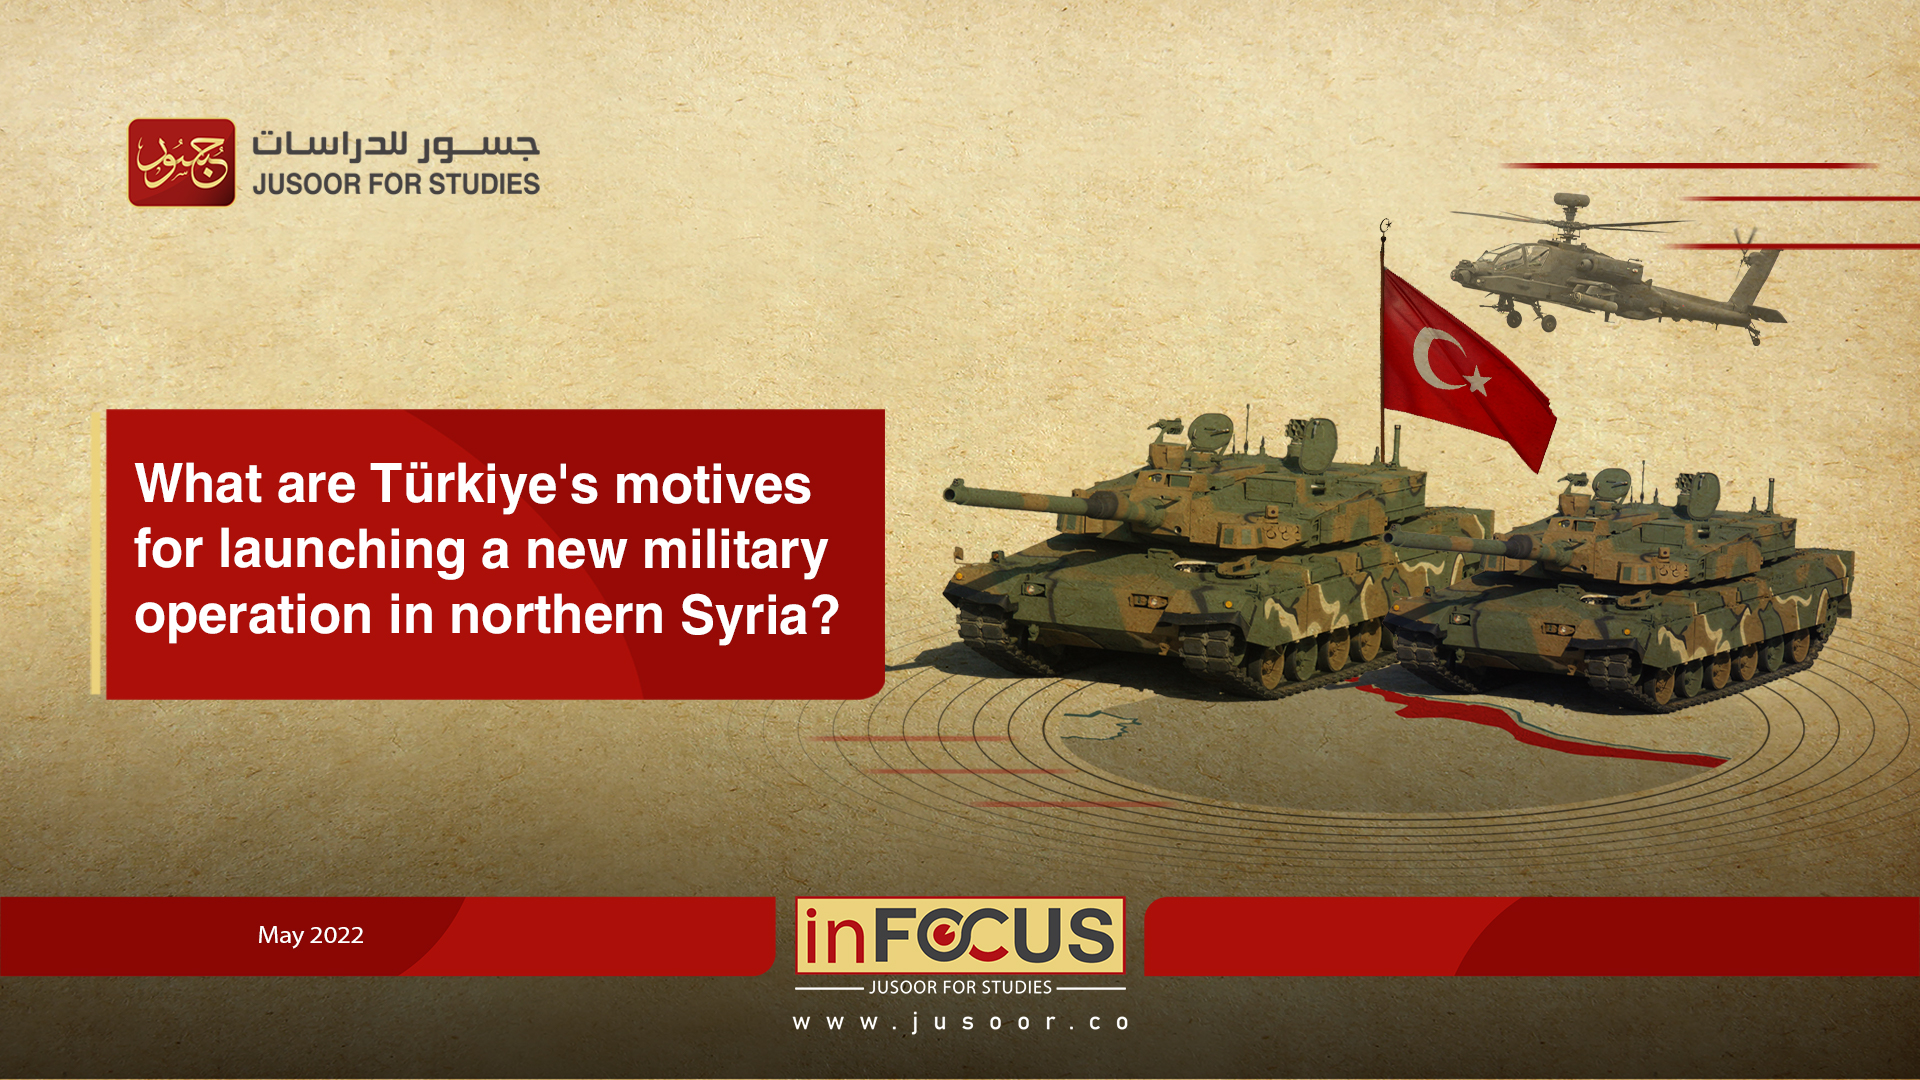 What are Türkiye's motives for launching a new military operation in northern Syria?